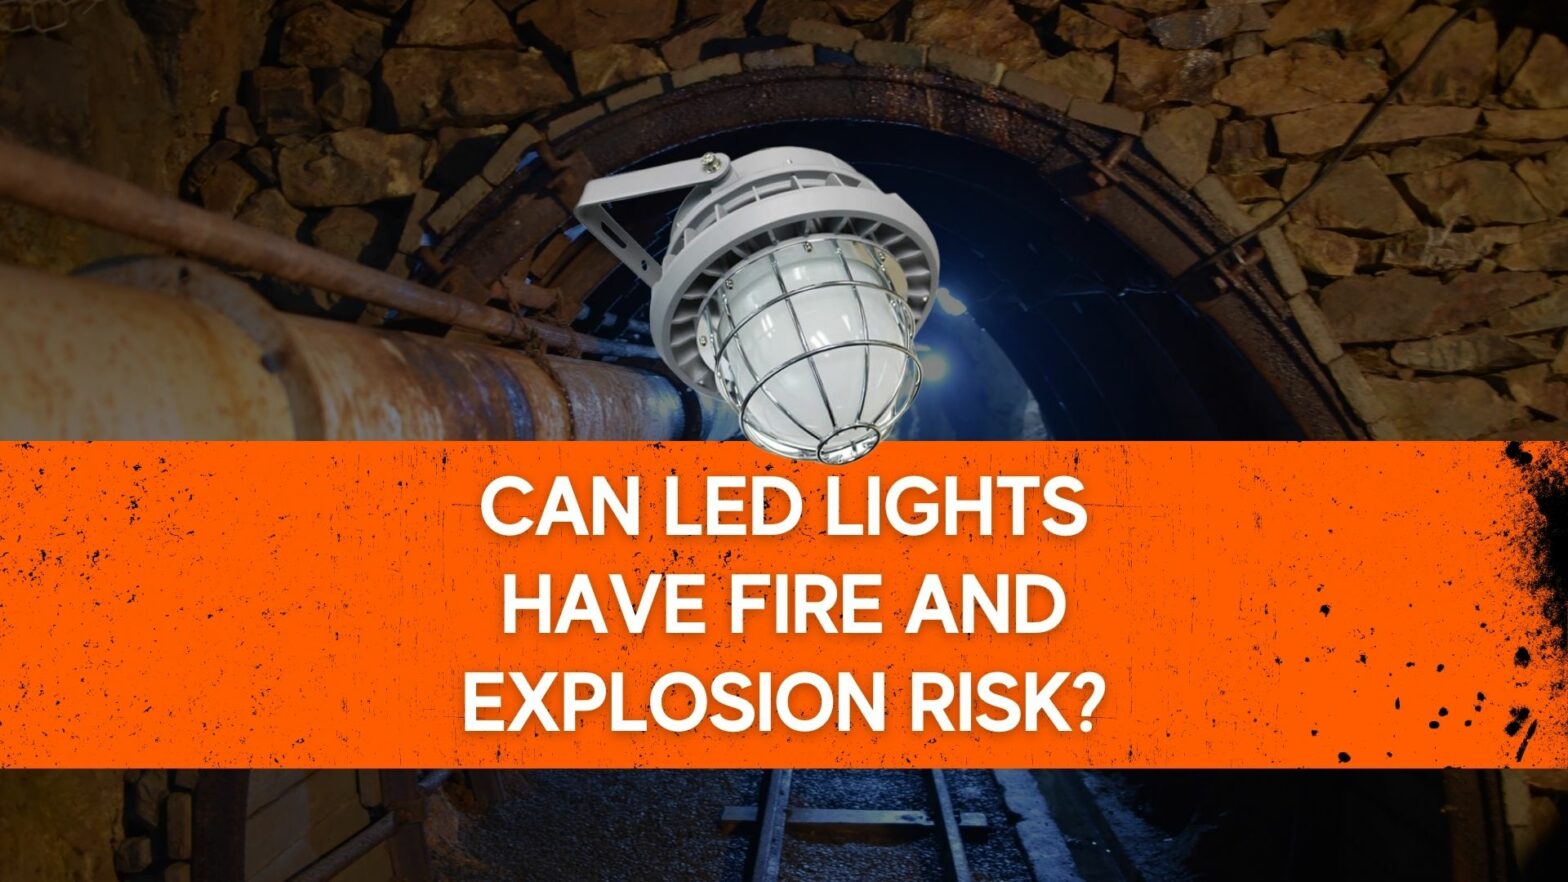 Can LED Lights Have Fire and Explosion Risk What to Look Out For LED lights being safe or causing trouble.